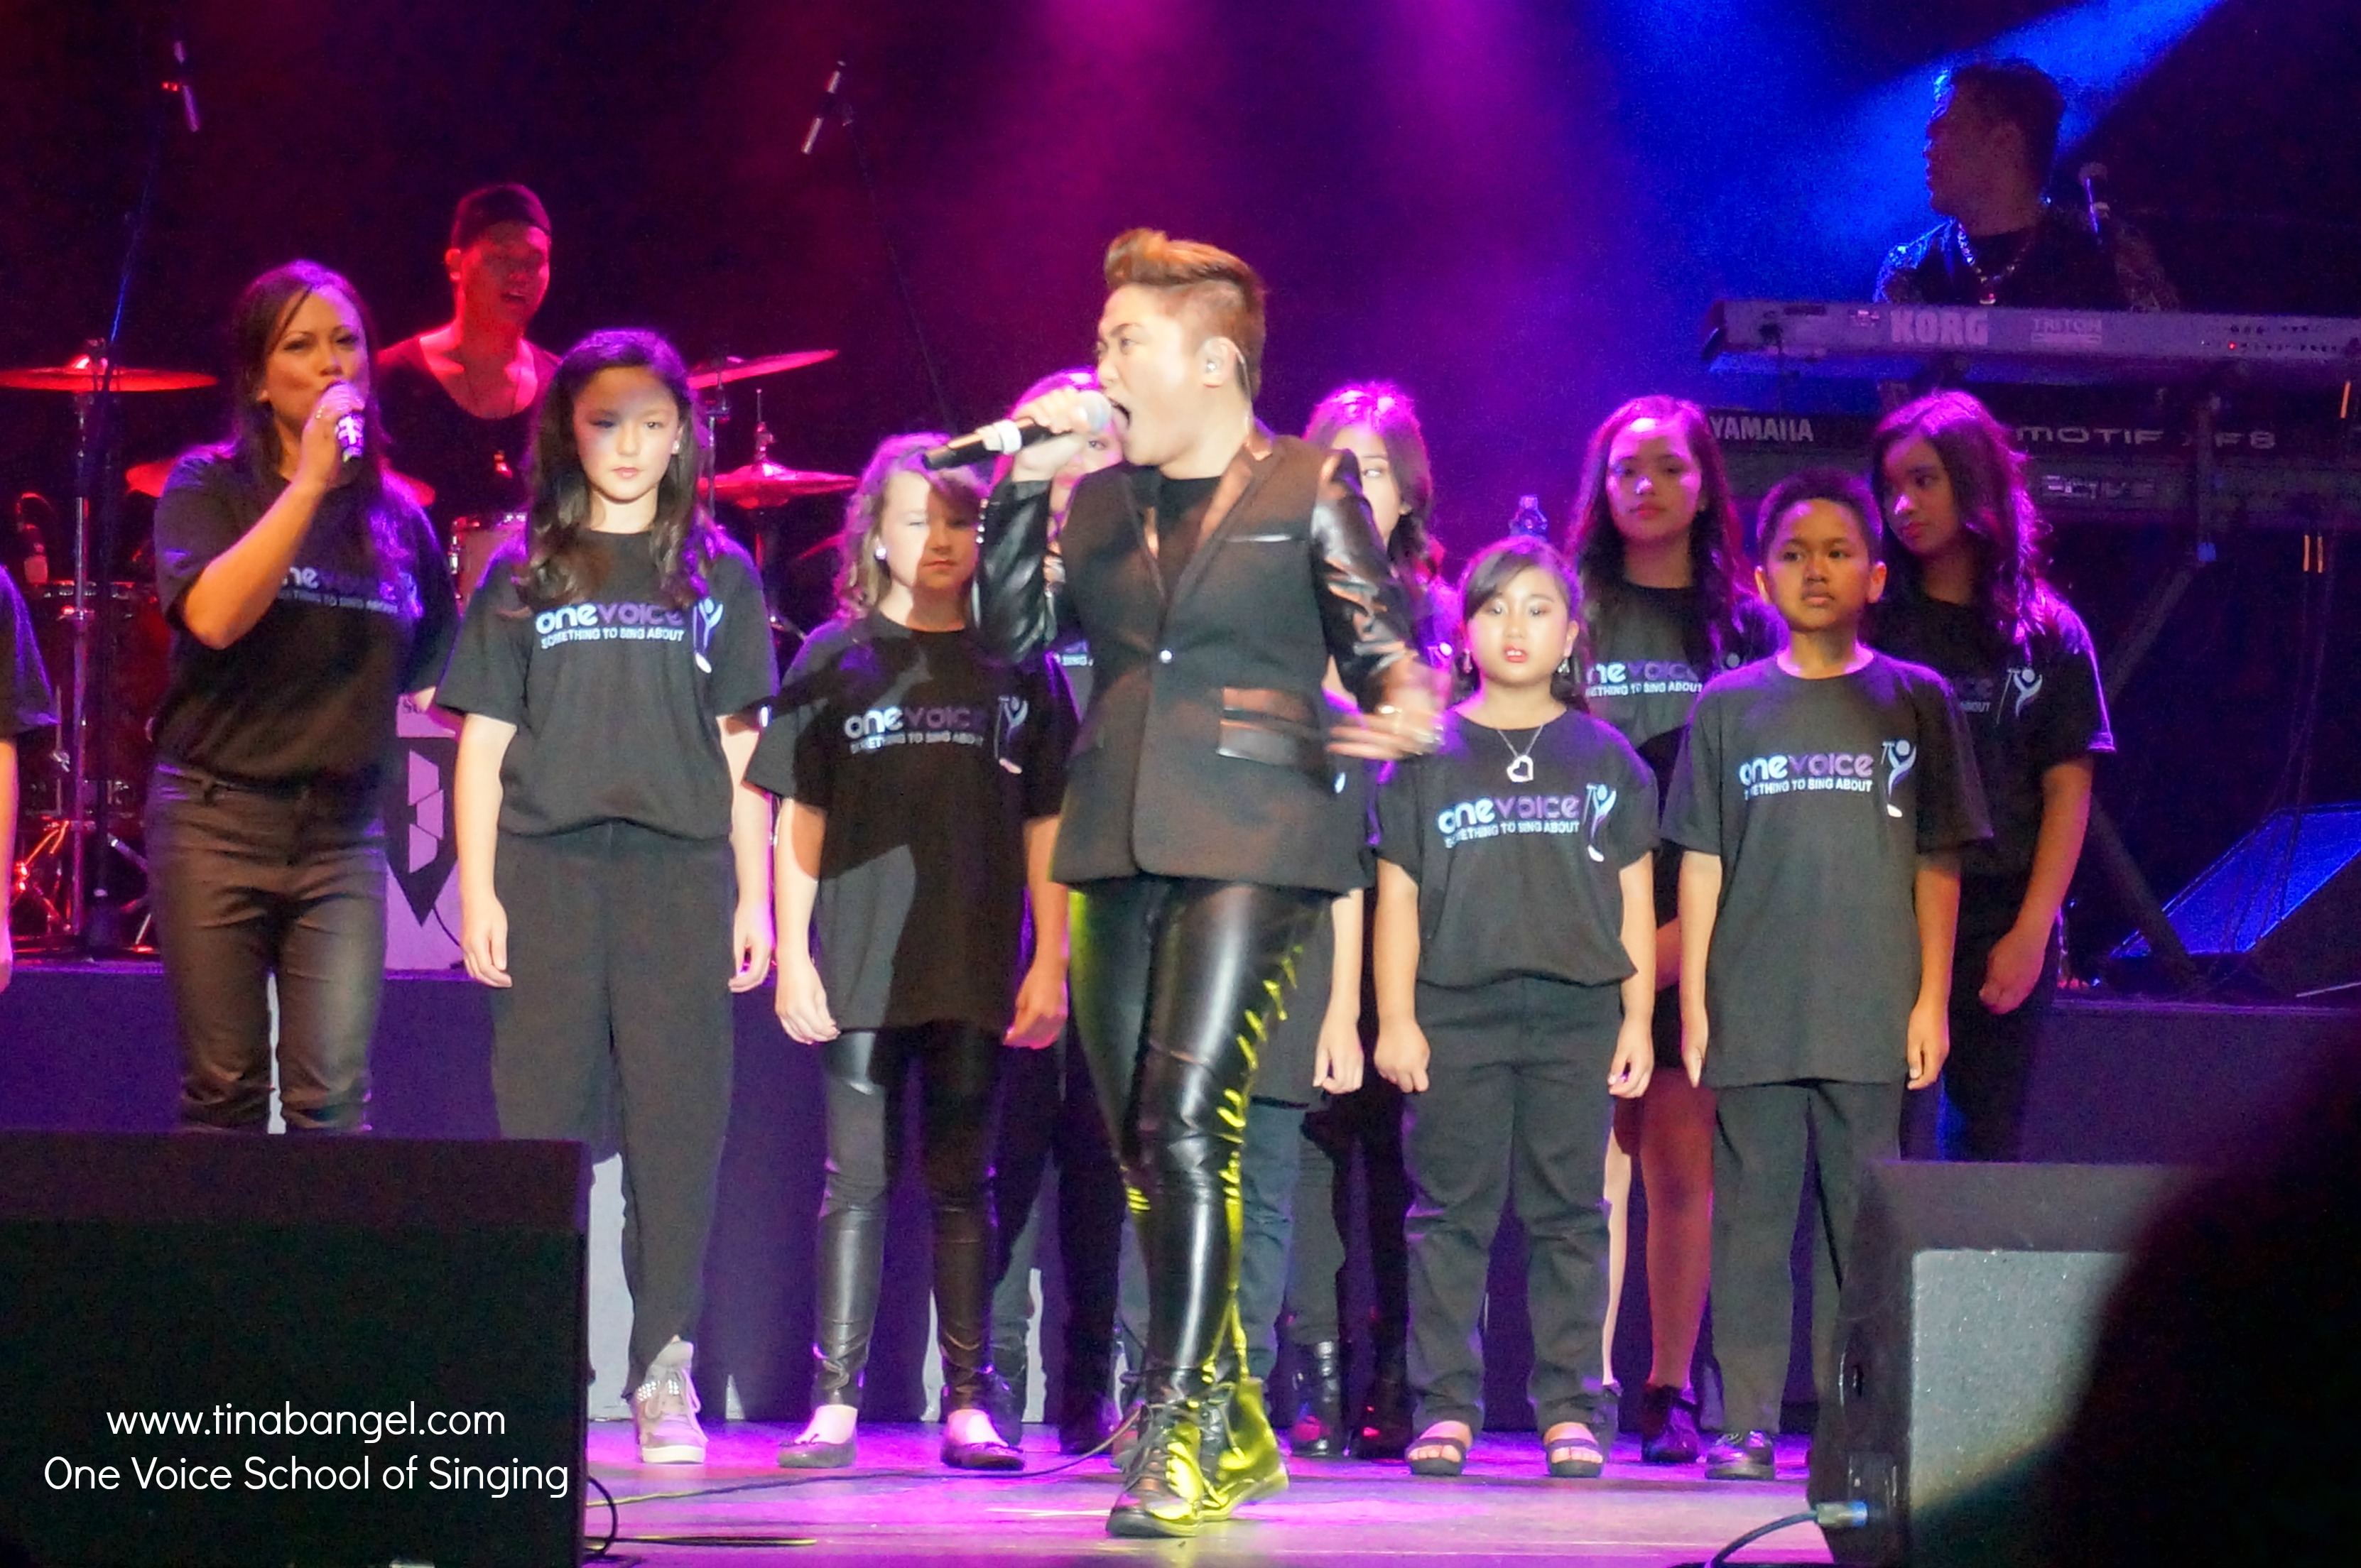 Charice with One Voice kids